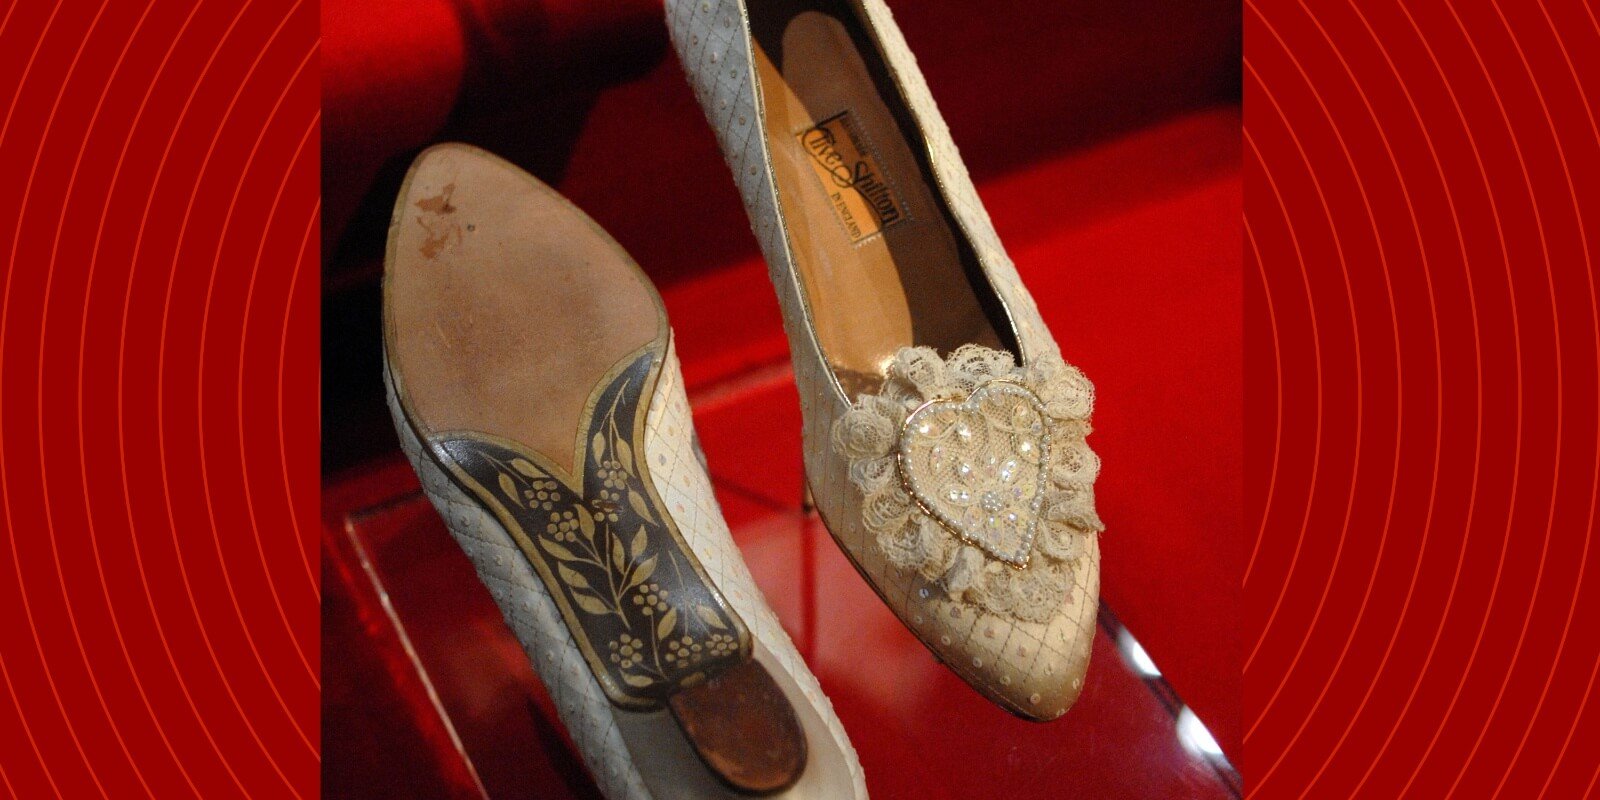 Princess Diana's wedding shoes held a secret message of love to Prince Charles.